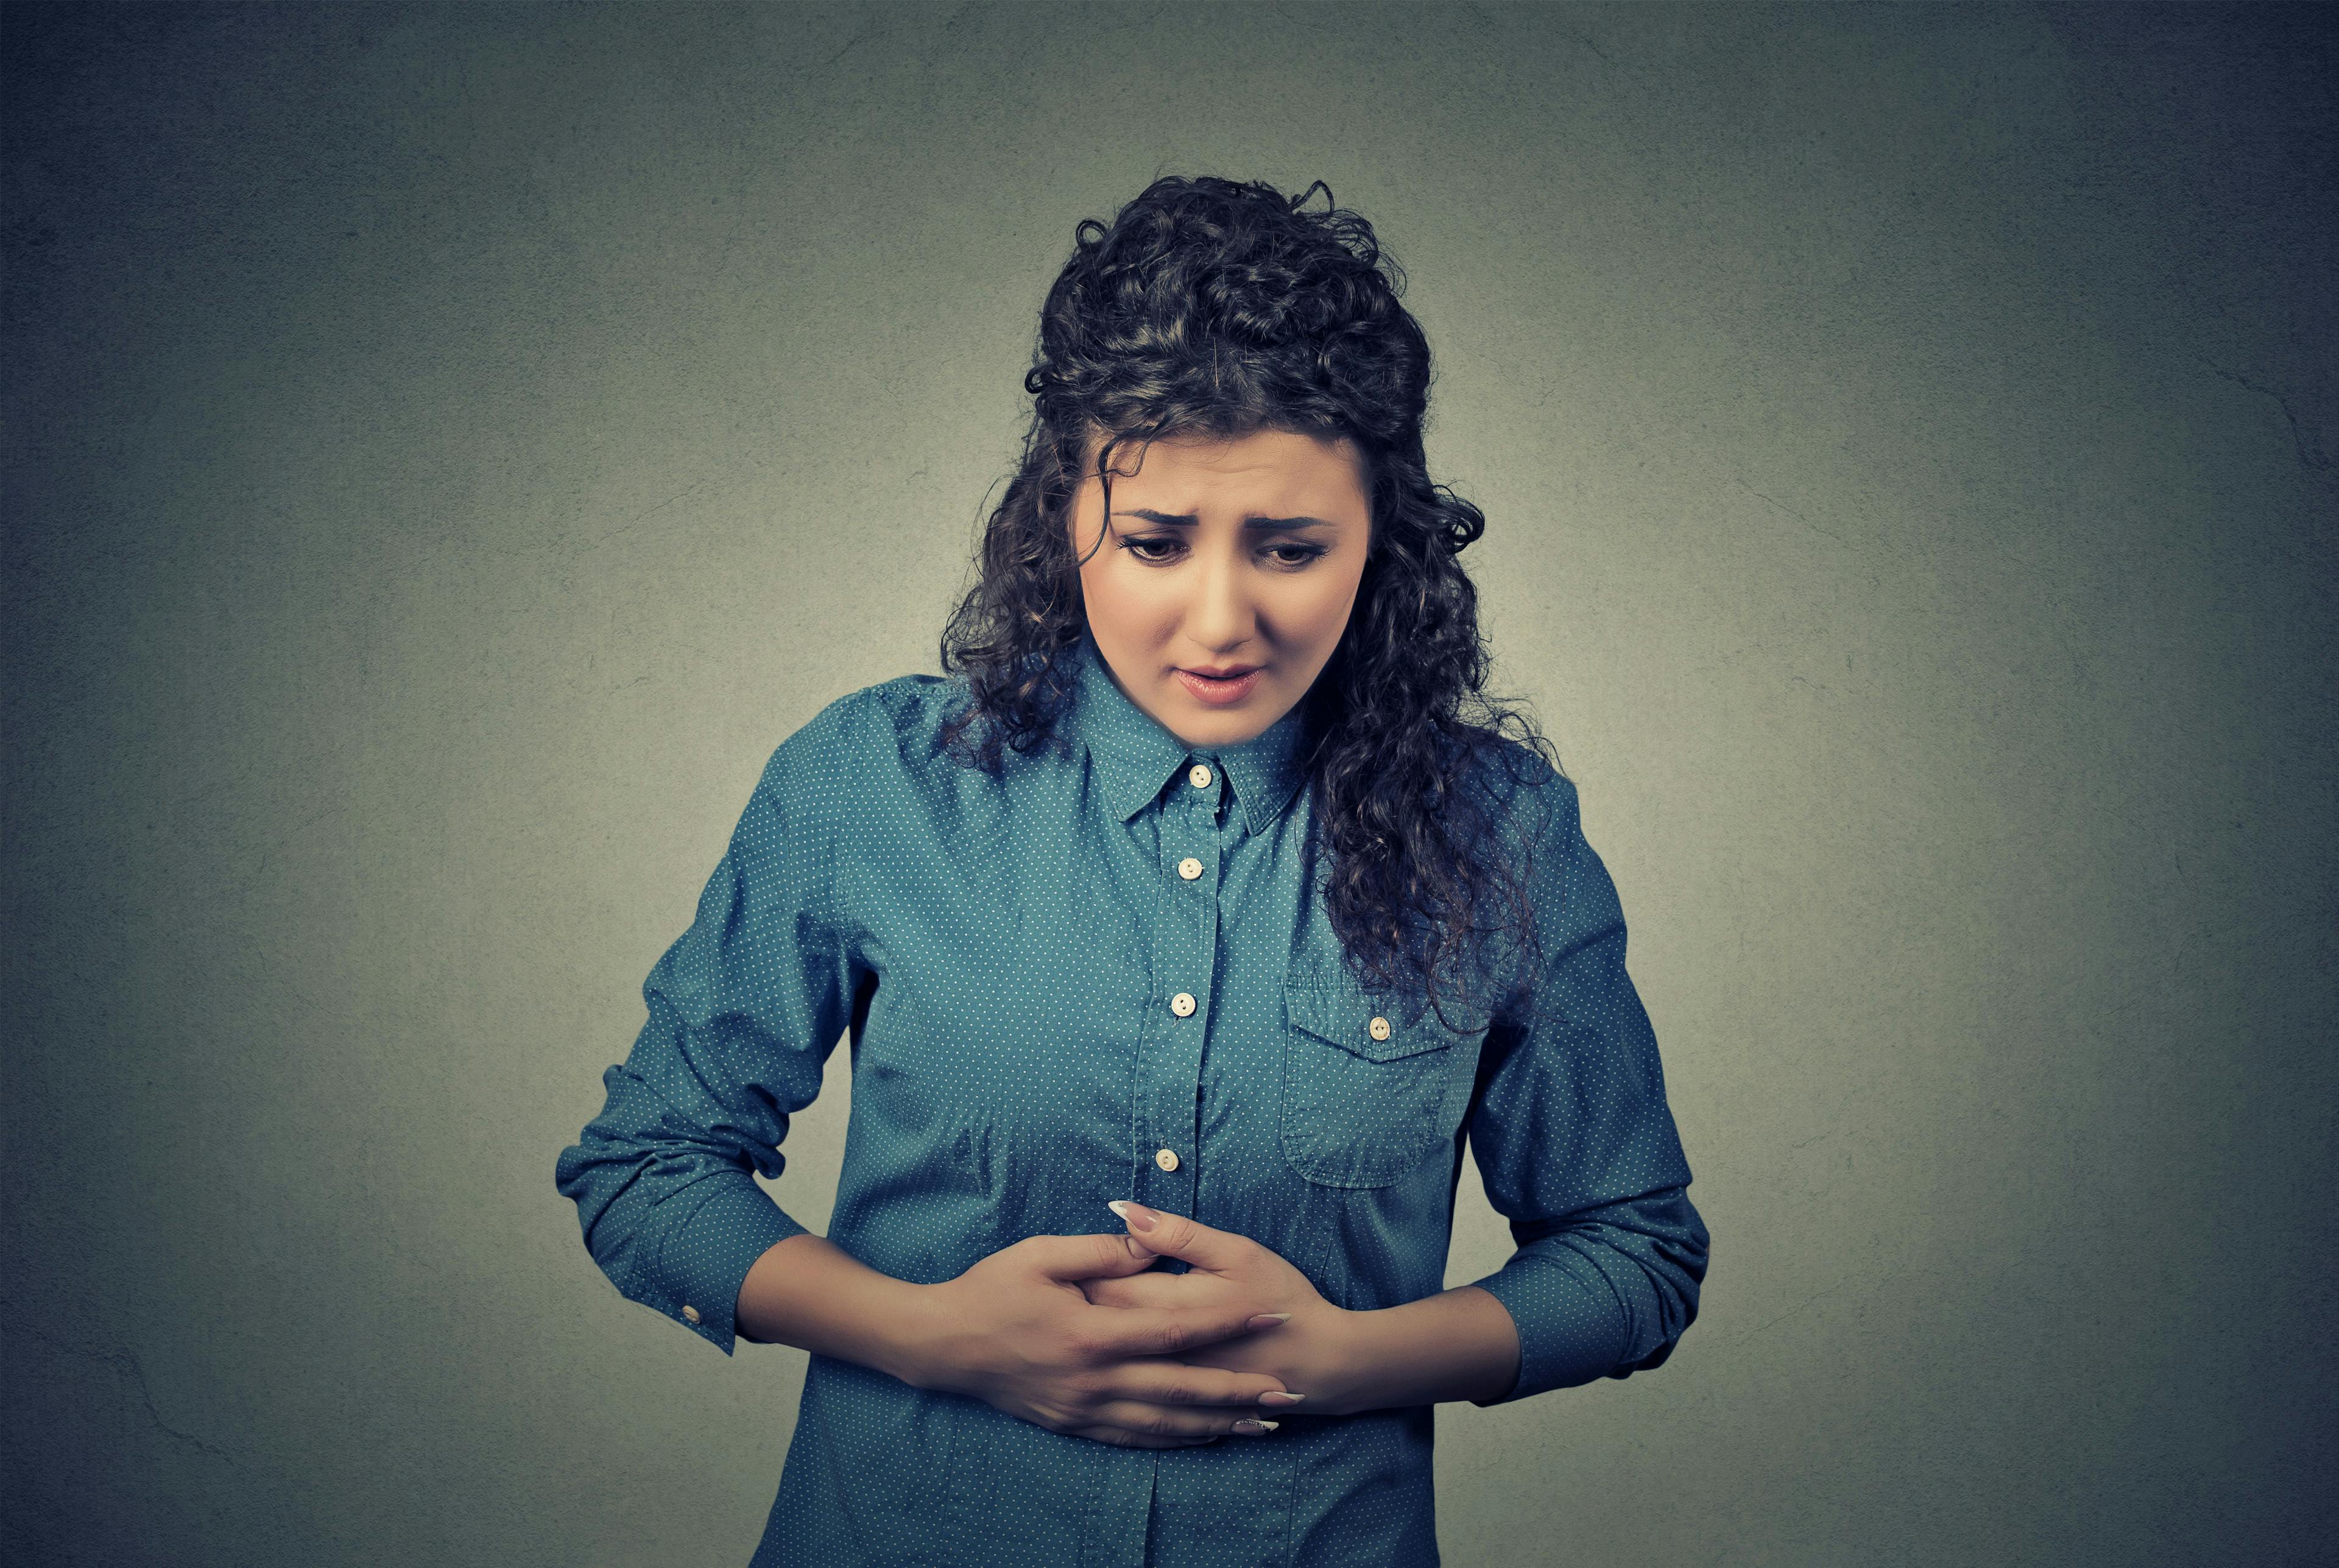 Woman with stomach ache holding stomach | Credit: Fotolia